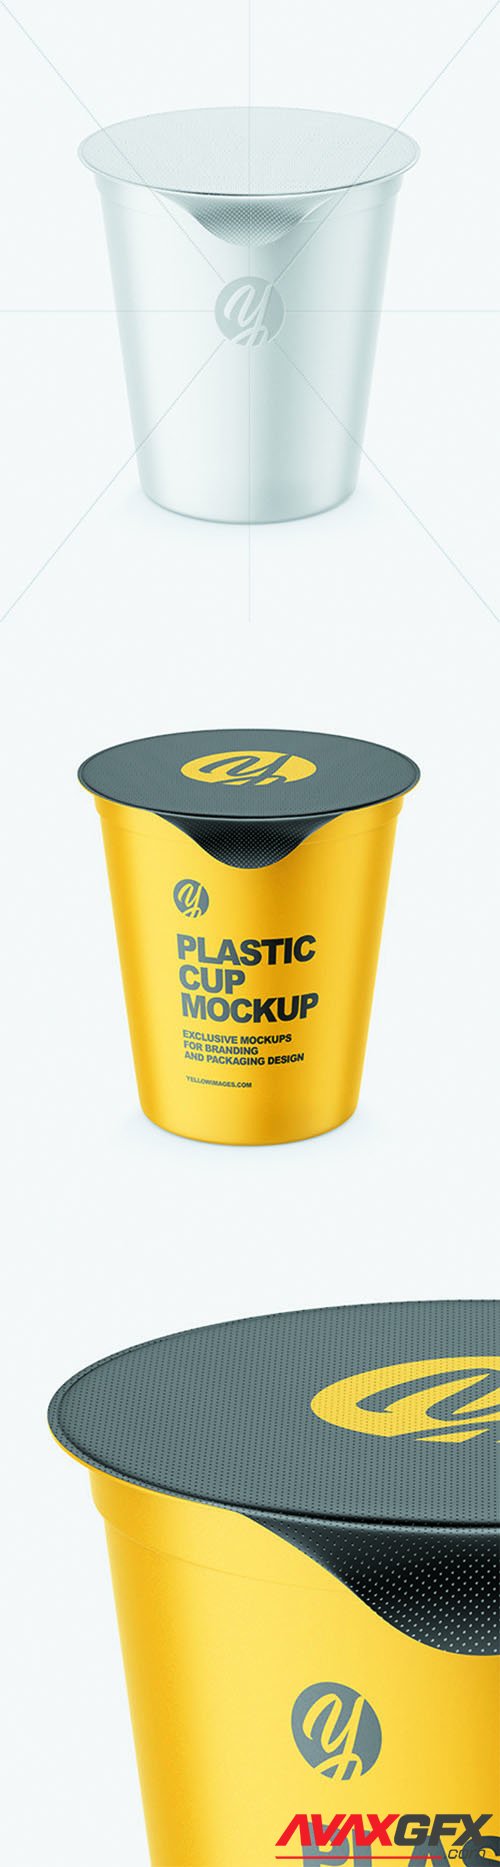 Download Plastic Cup Mockup 68423 » AVAXGFX - All Downloads that ...